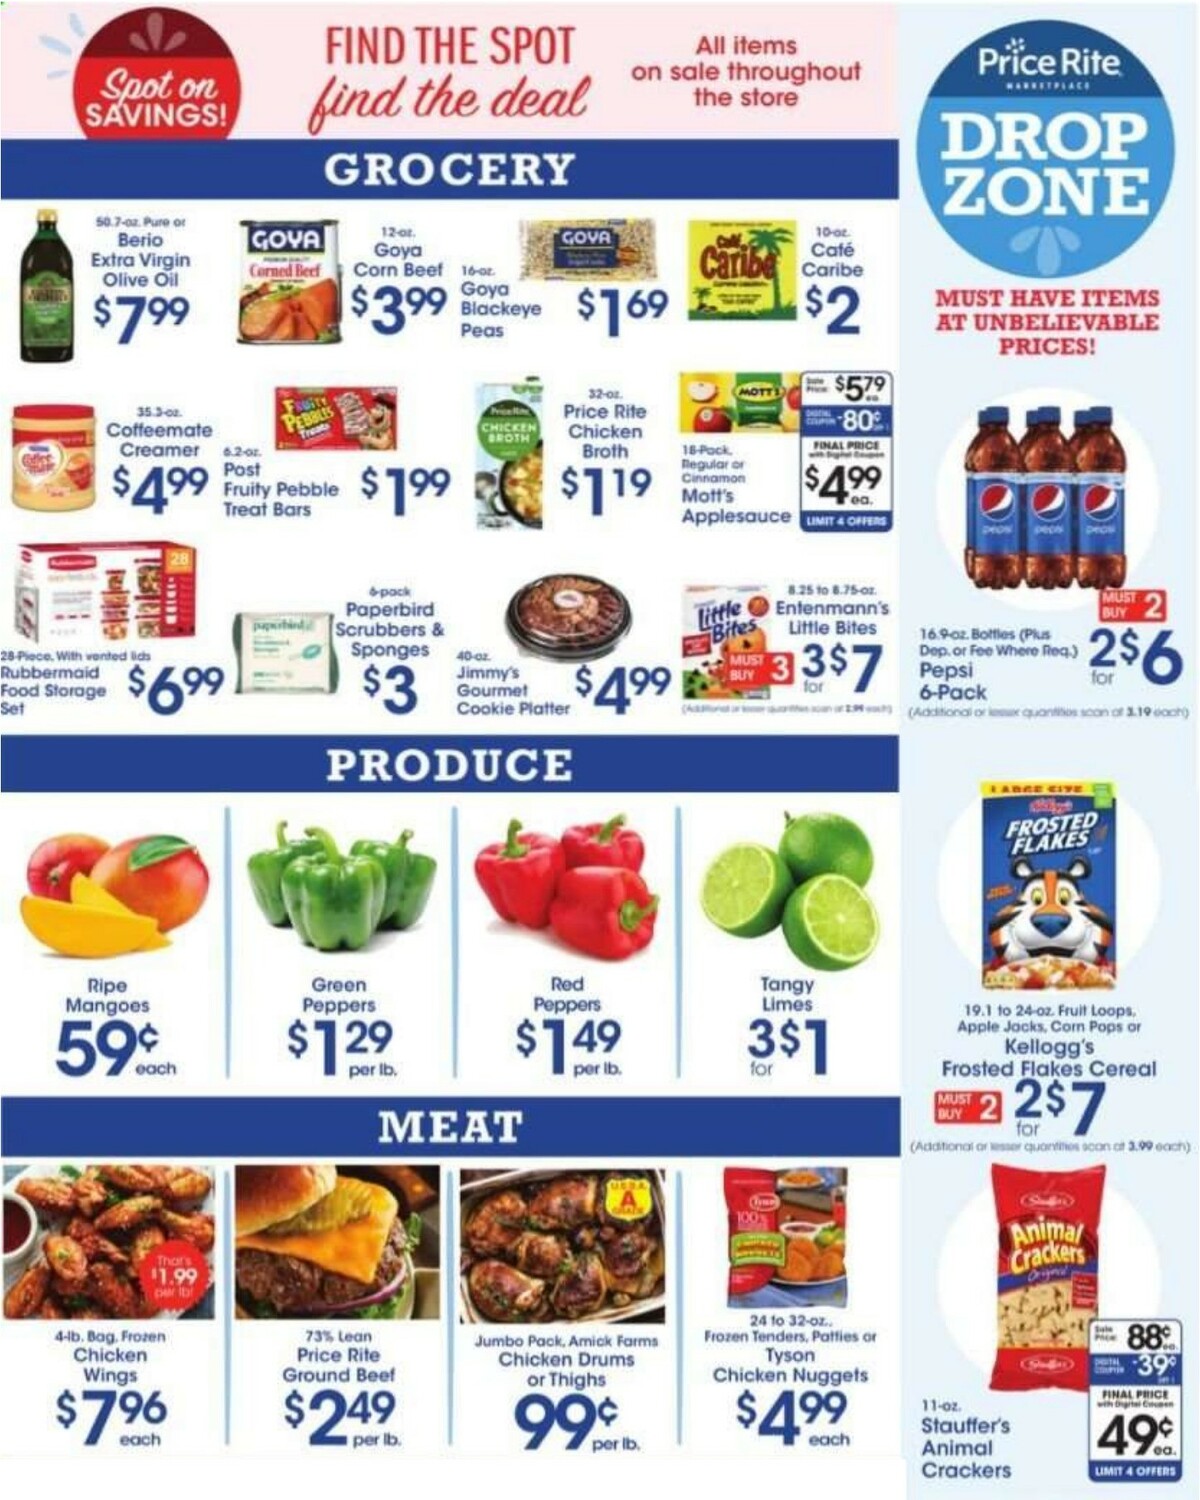 Price Rite Weekly Ad from December 26